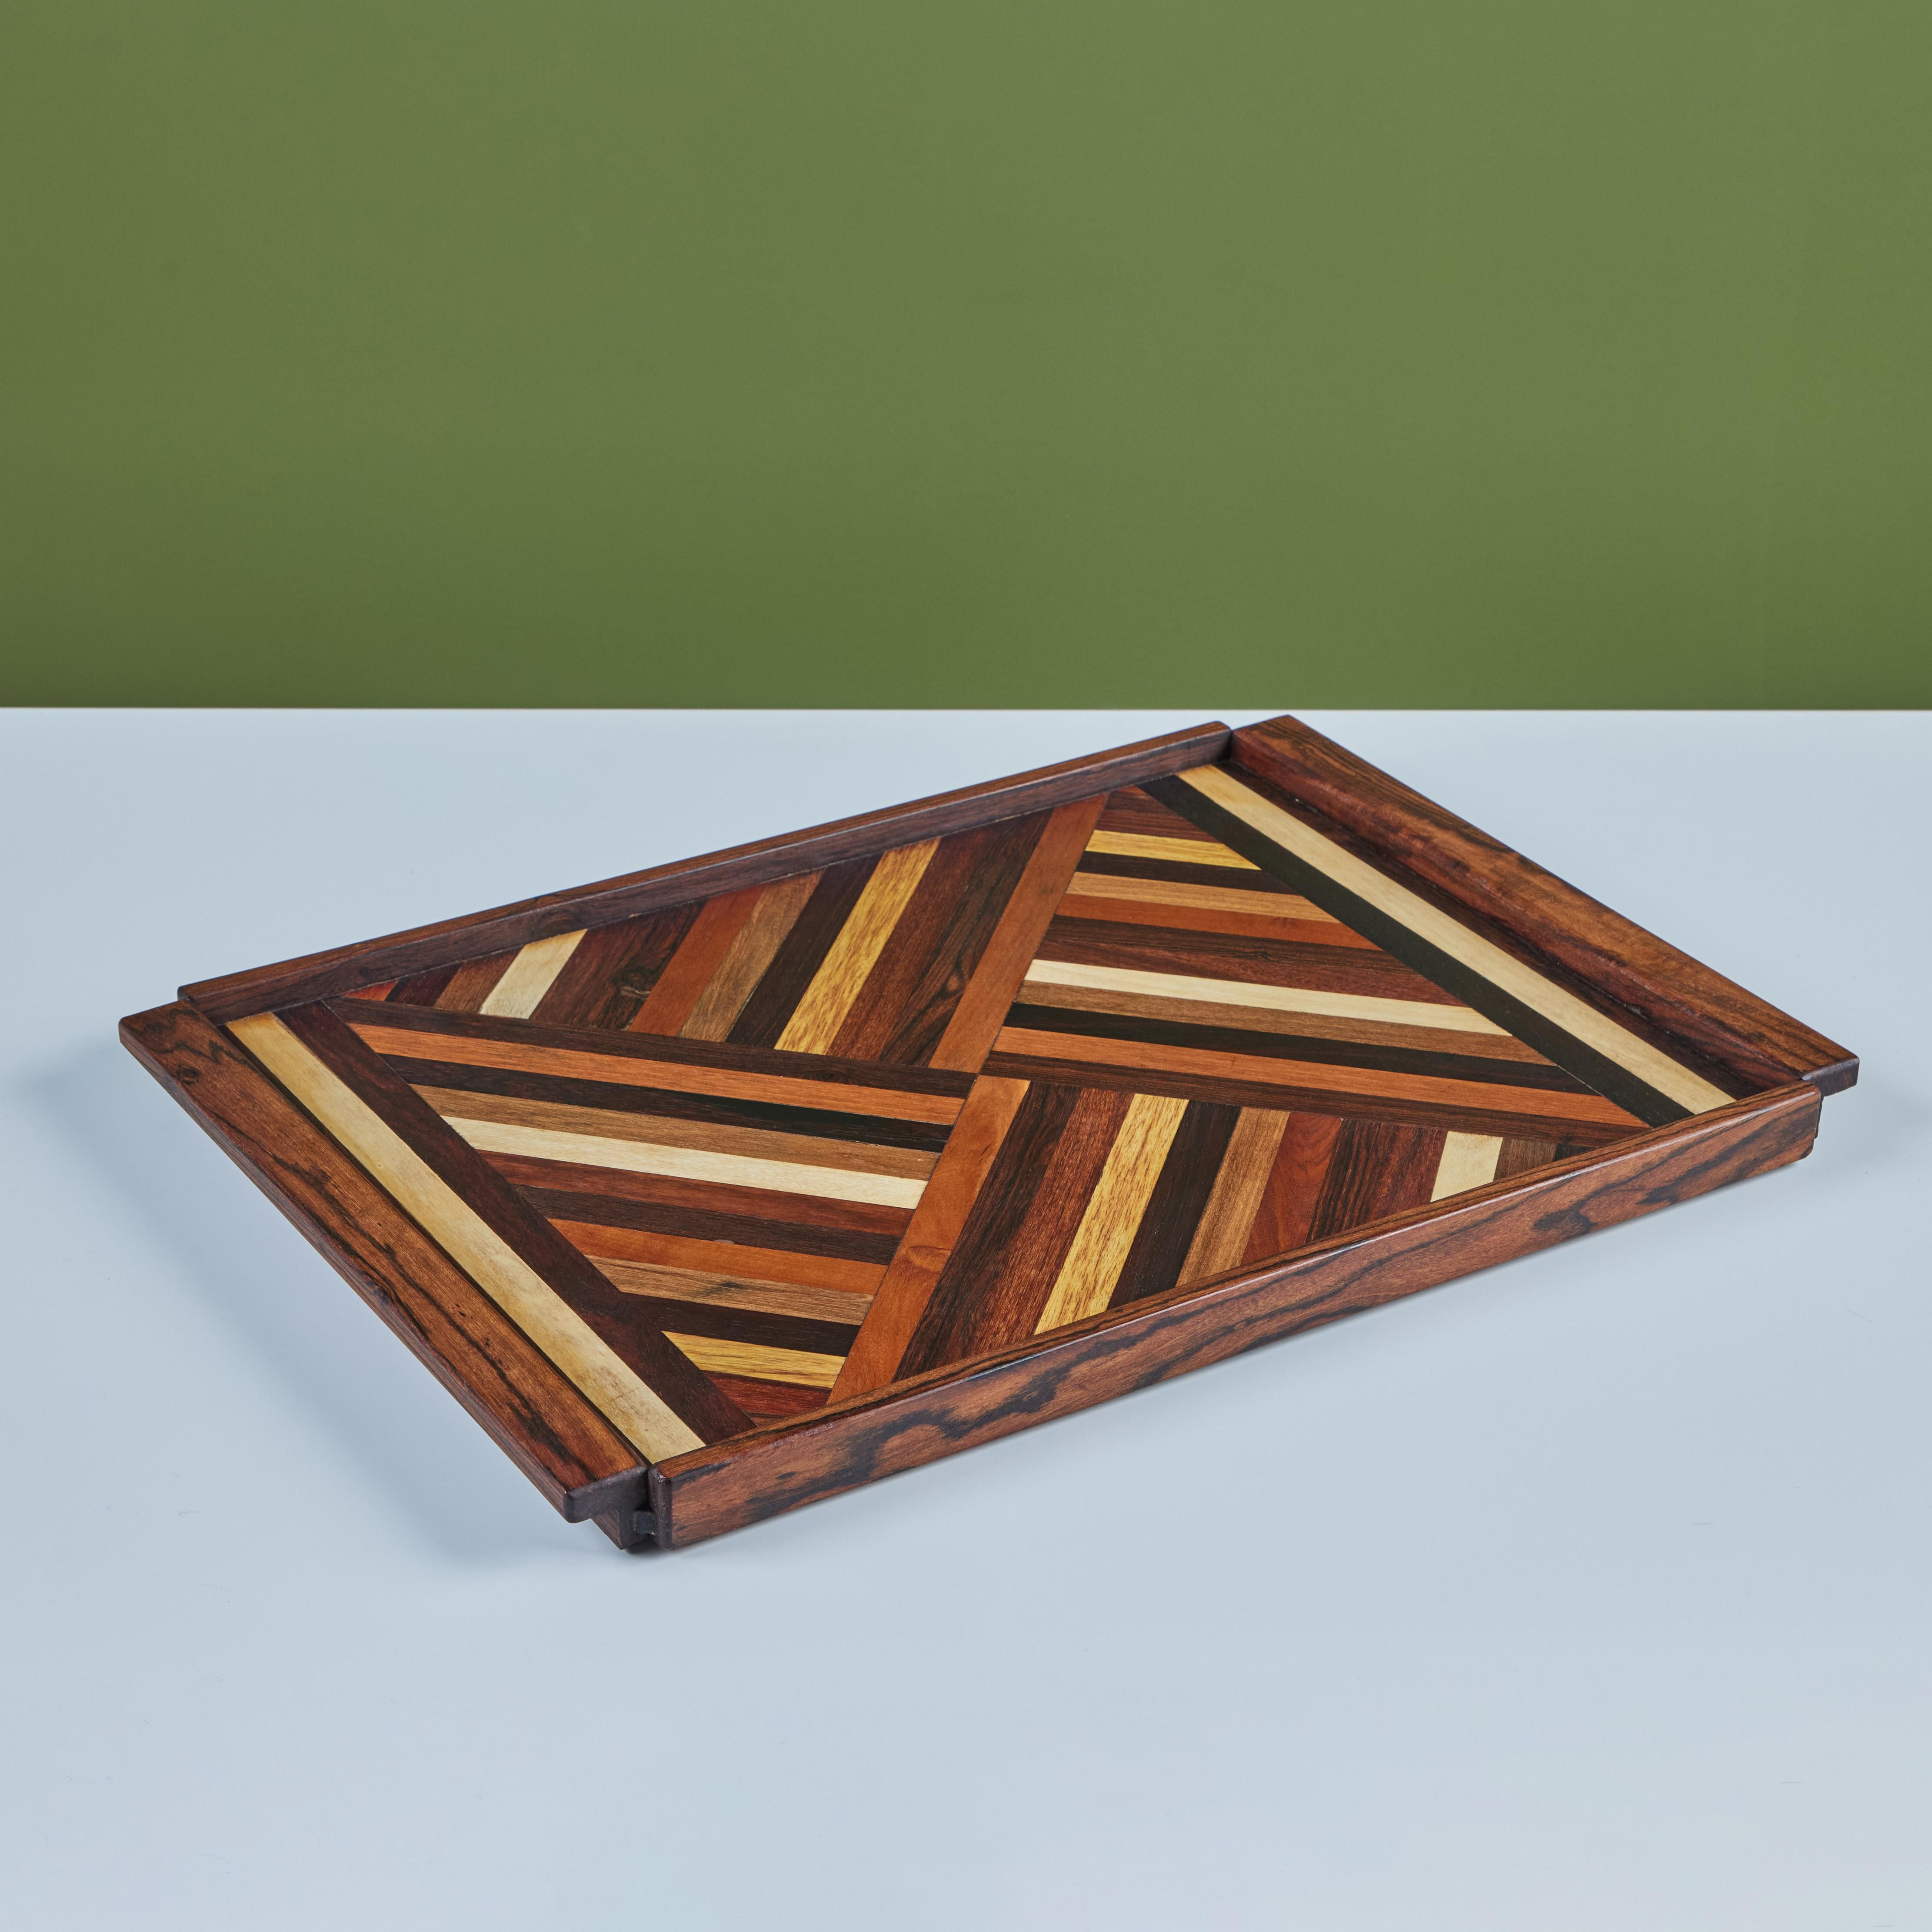 A rosewood serving tray by Don Shoemaker for his company Señal in the 1960s. The surface of the tray has a repeating geometric marquetry pattern in a gradient of local Mexican hardwoods. The rectangular tray has four sides and two handles.

A